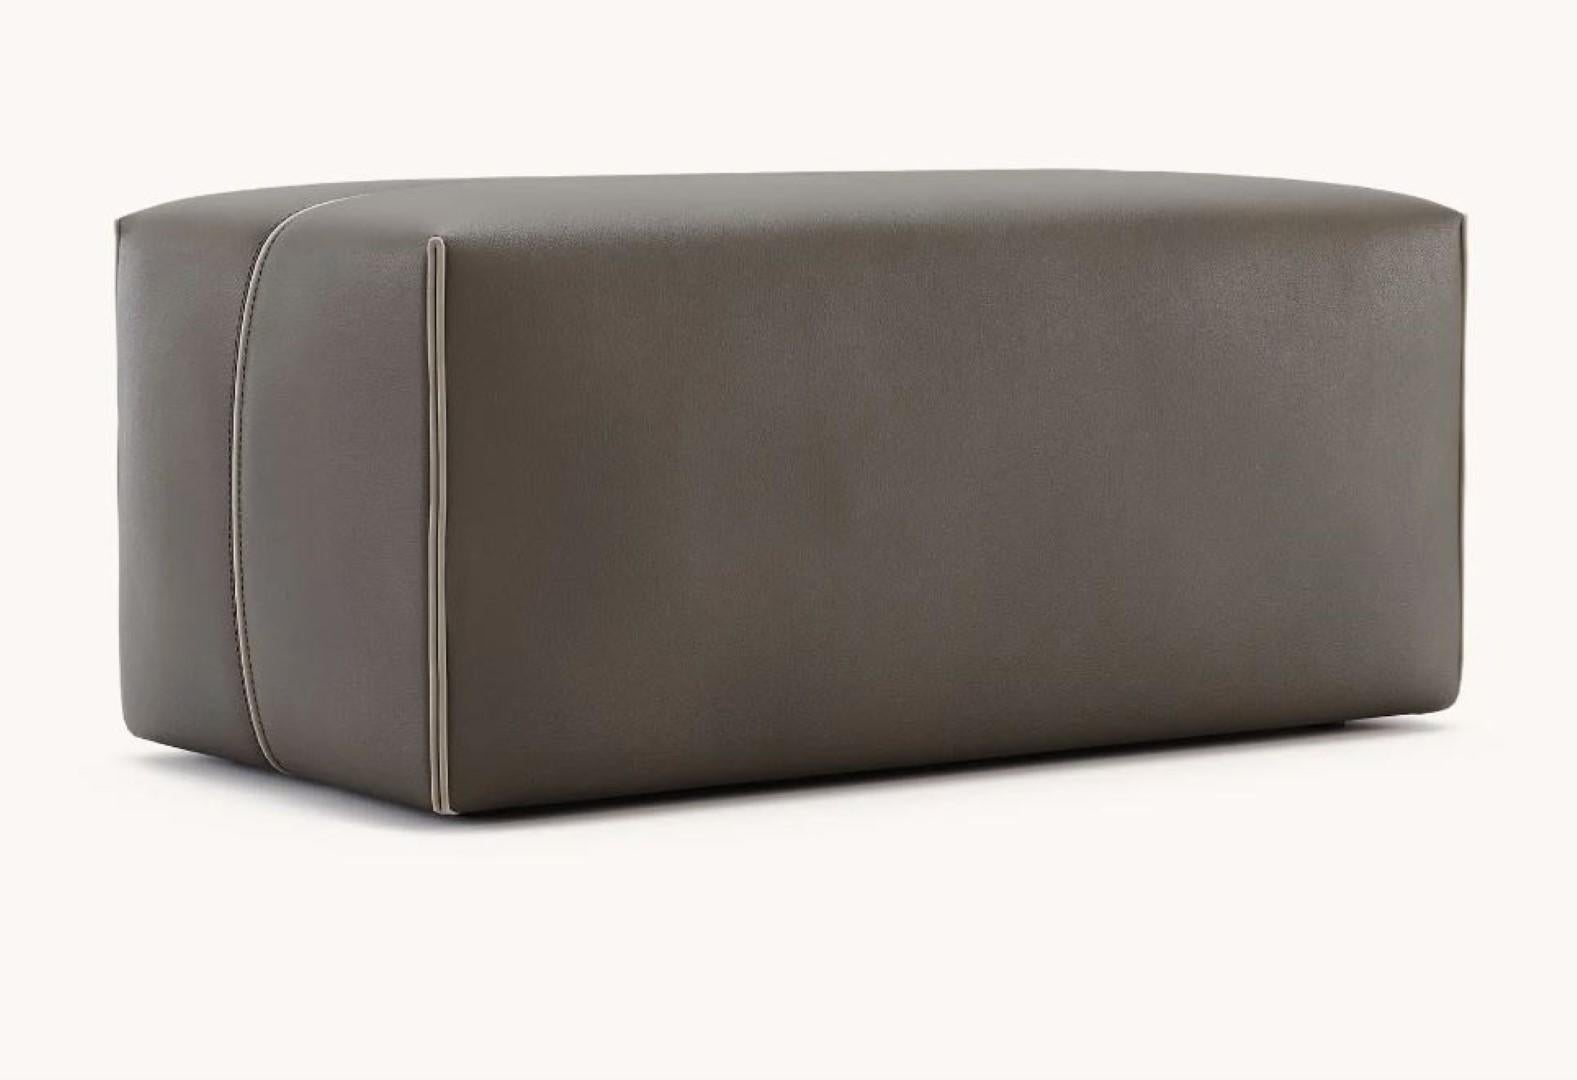 Grant S Pouf by Domkapa
Materials: Fiber. 
Dimensions: W 94 x D 45 x H 40 cm. 
Also available in different materials.

The construction of Grant pouf skillfully combines aesthetics and ergonomics to establish this as the go-to solution for